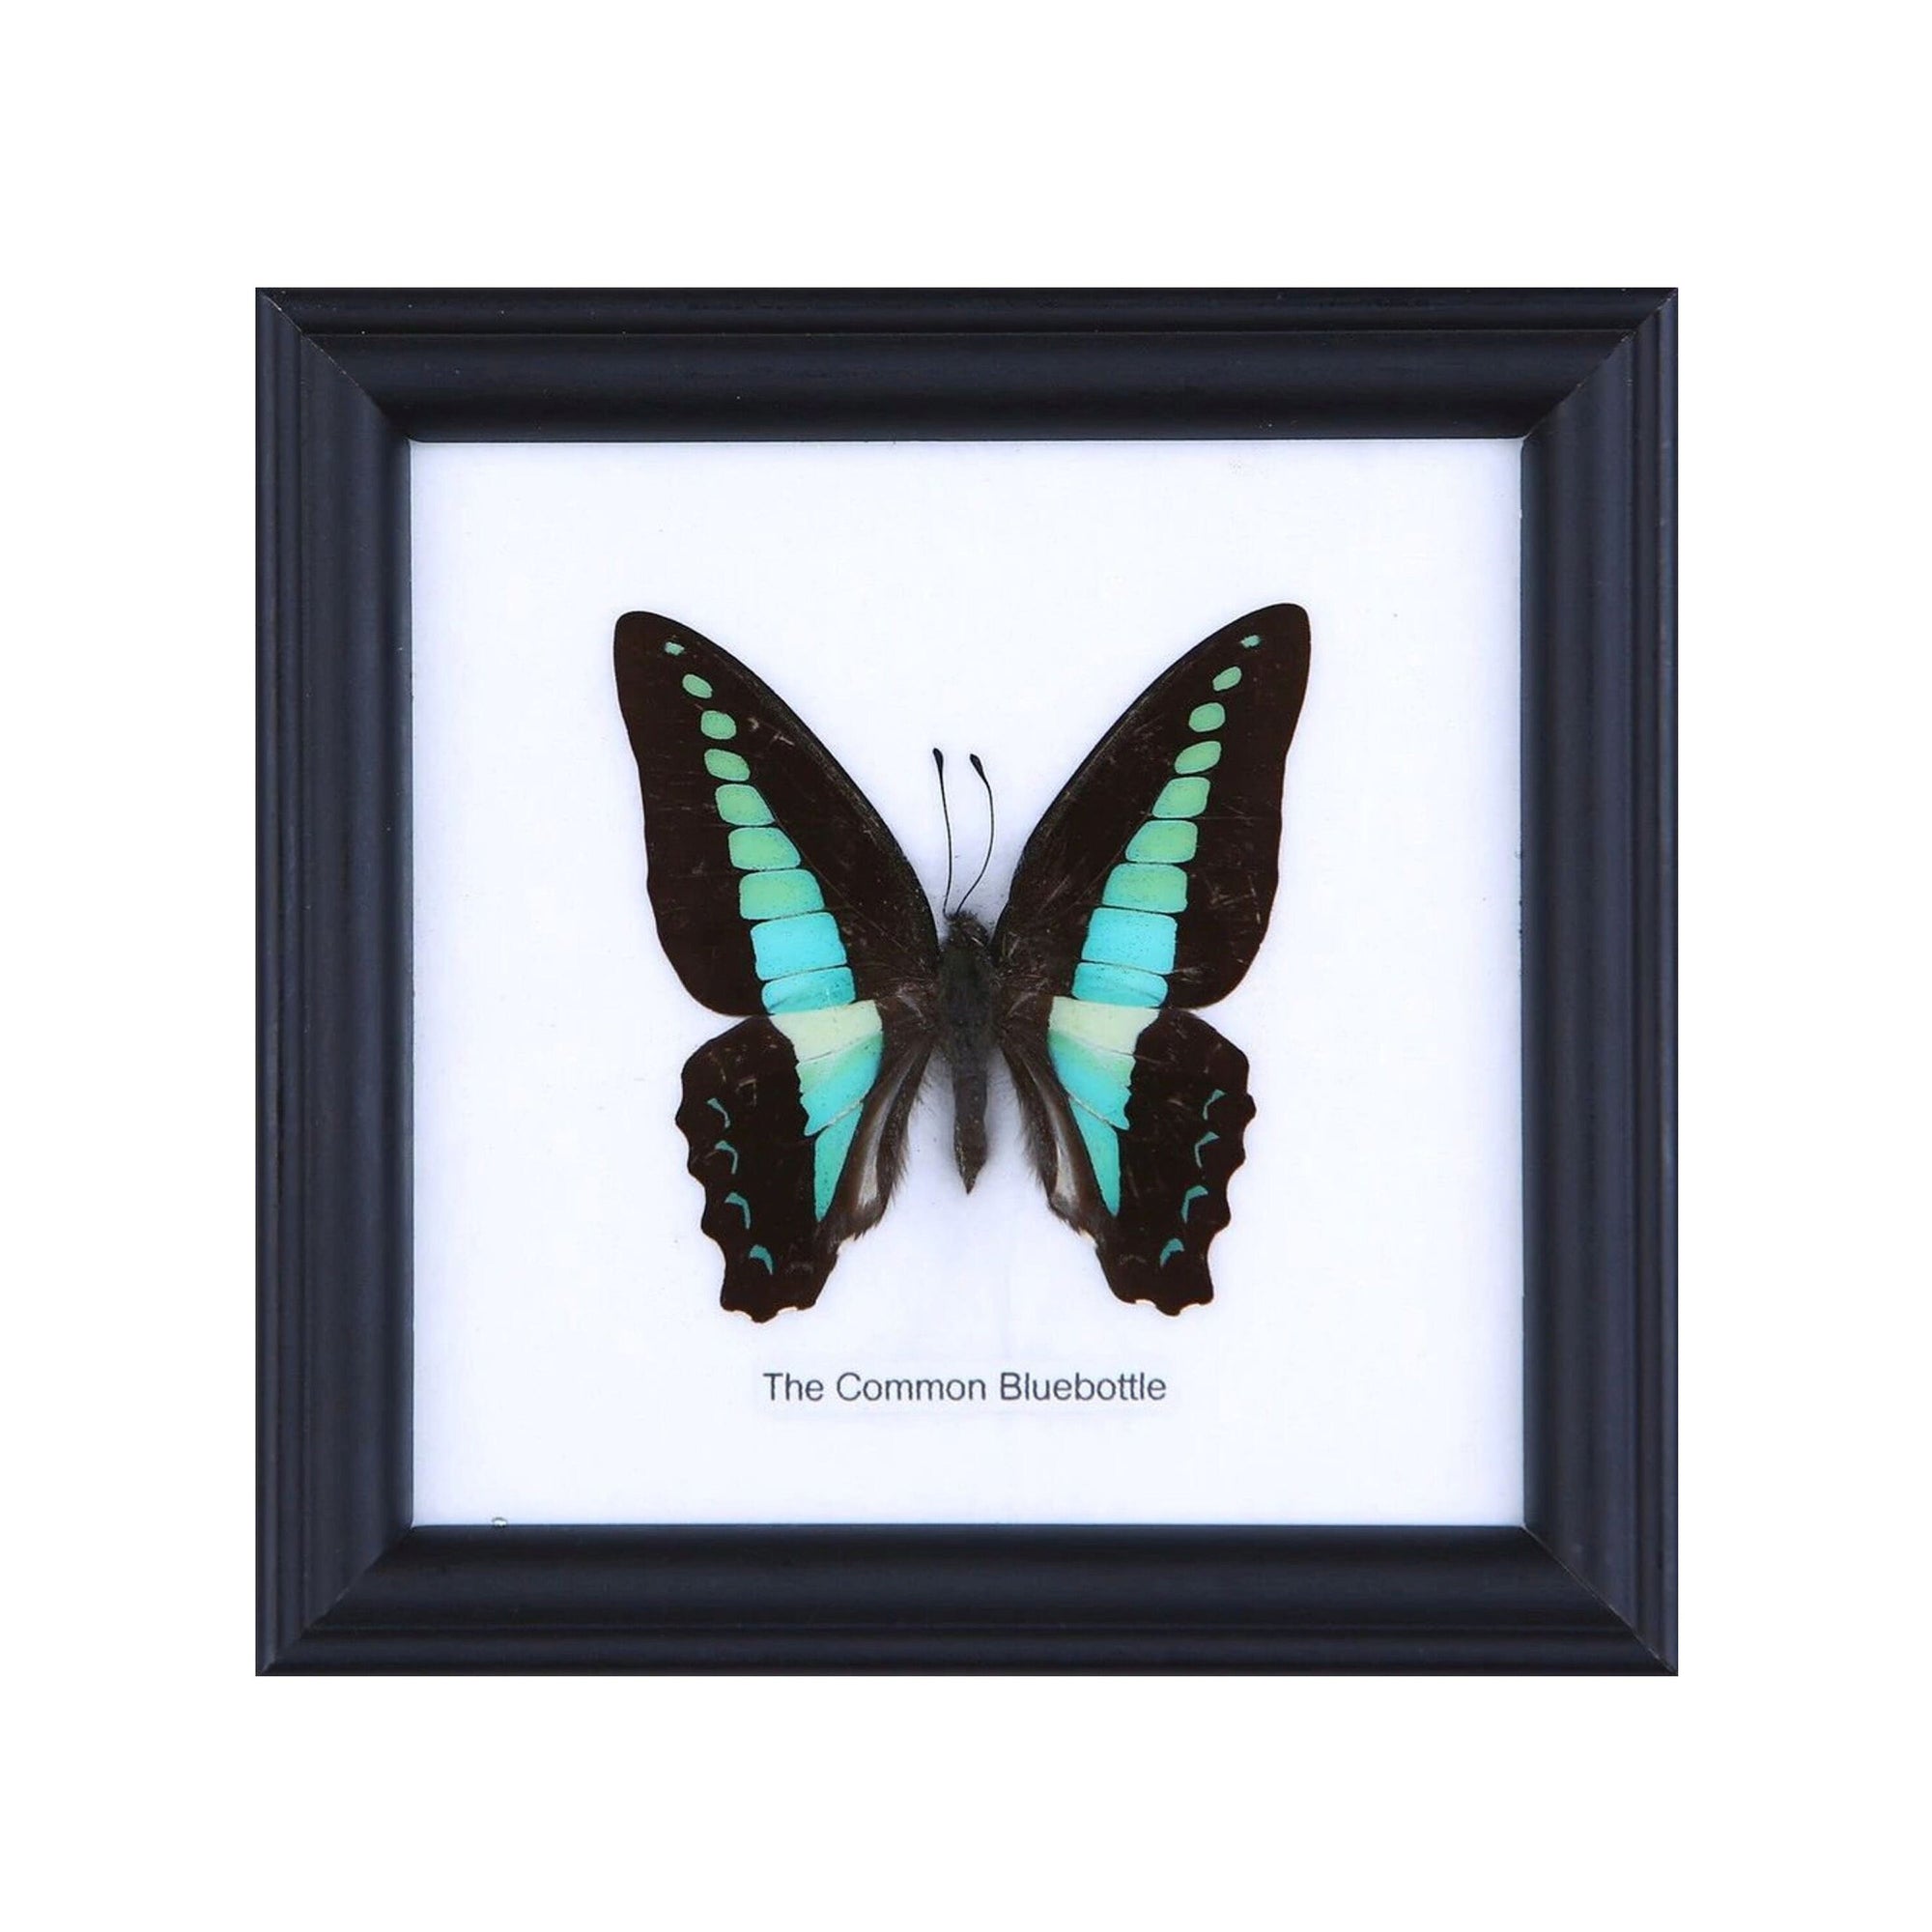 12 FRAMES (FOR RESELLERS) The Common Bluebottle Butterflies Wall Hanging Frame Home Décor 5 x 5 In. Gift Boxed. Wholesale